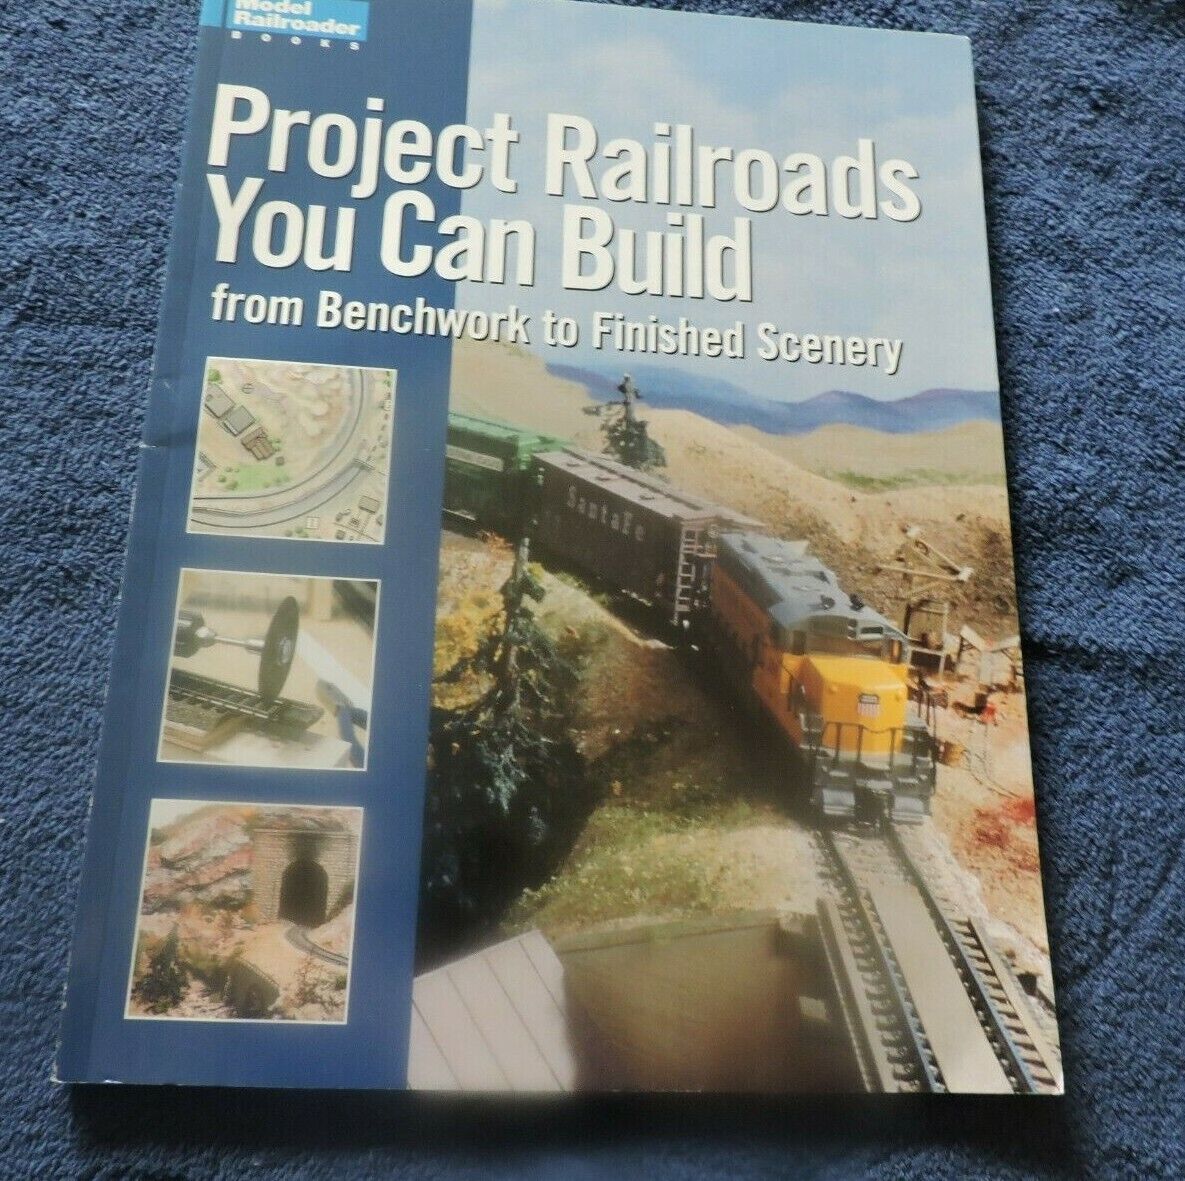 PROJECT RAILROADS YOU CAN BUILD FROM BENCHWORK TO FINISHED SCENERY